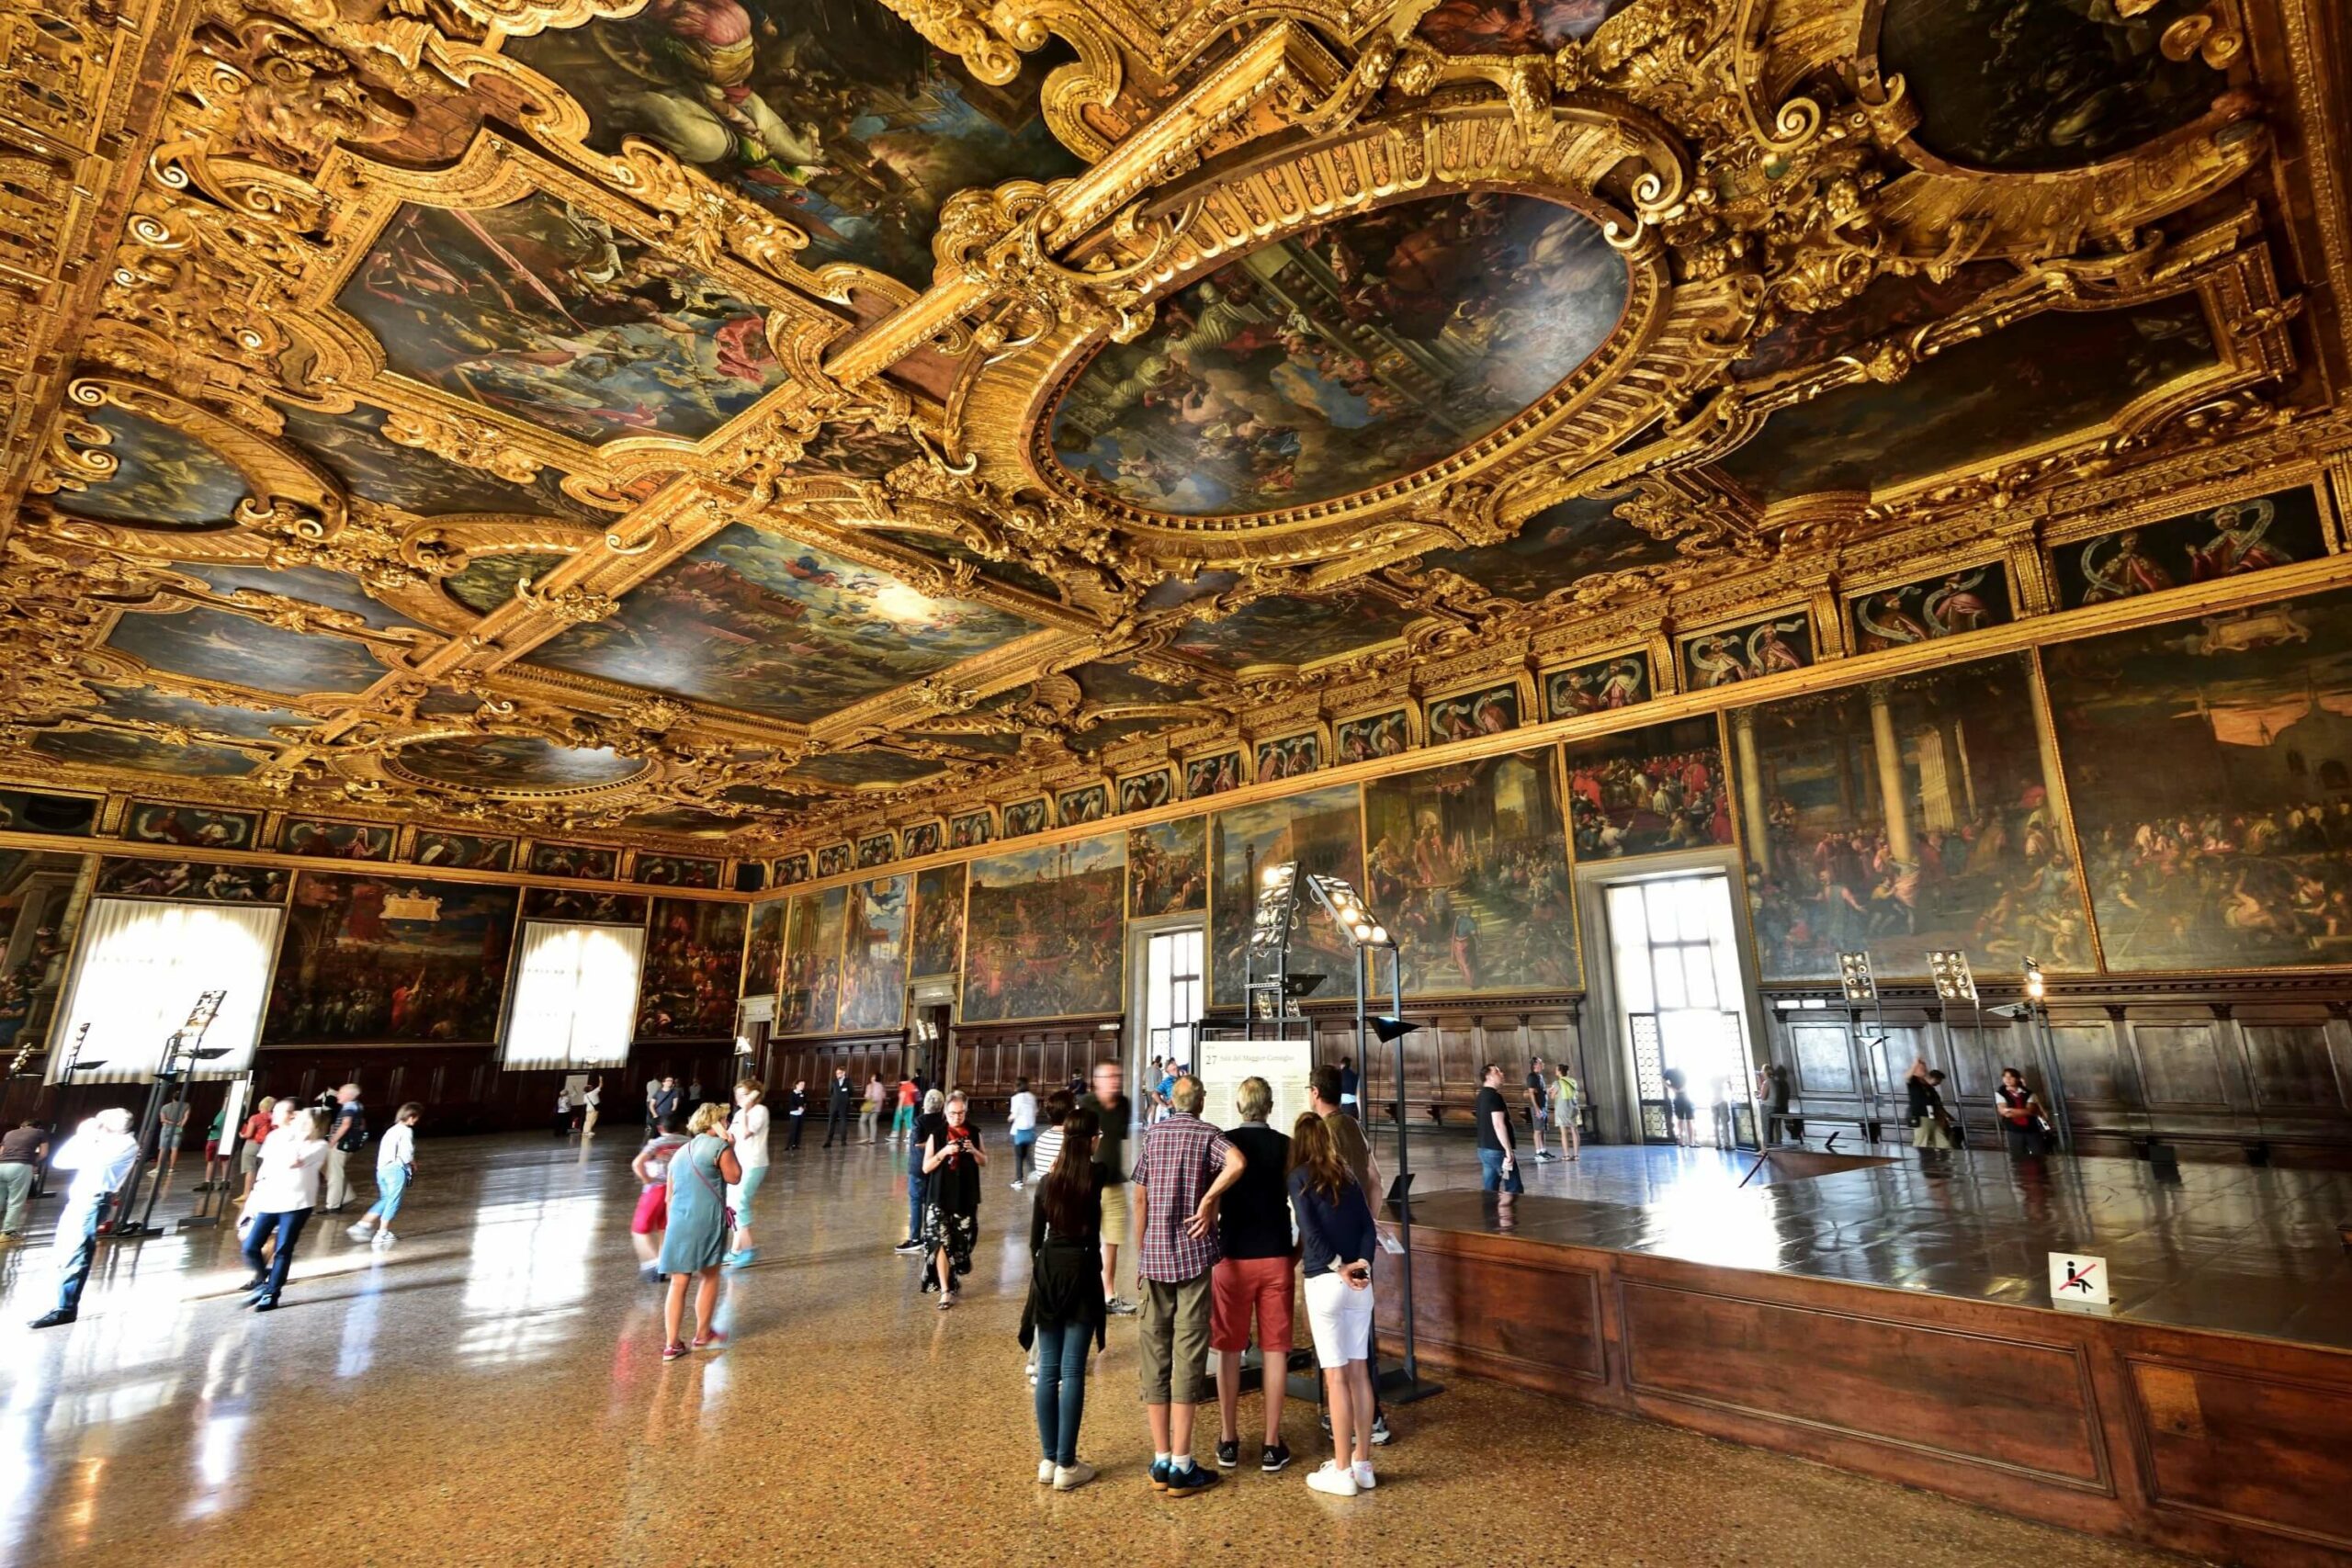 A group of people standing in a large room inside the Venice Doge Palace with ornate ceilings.